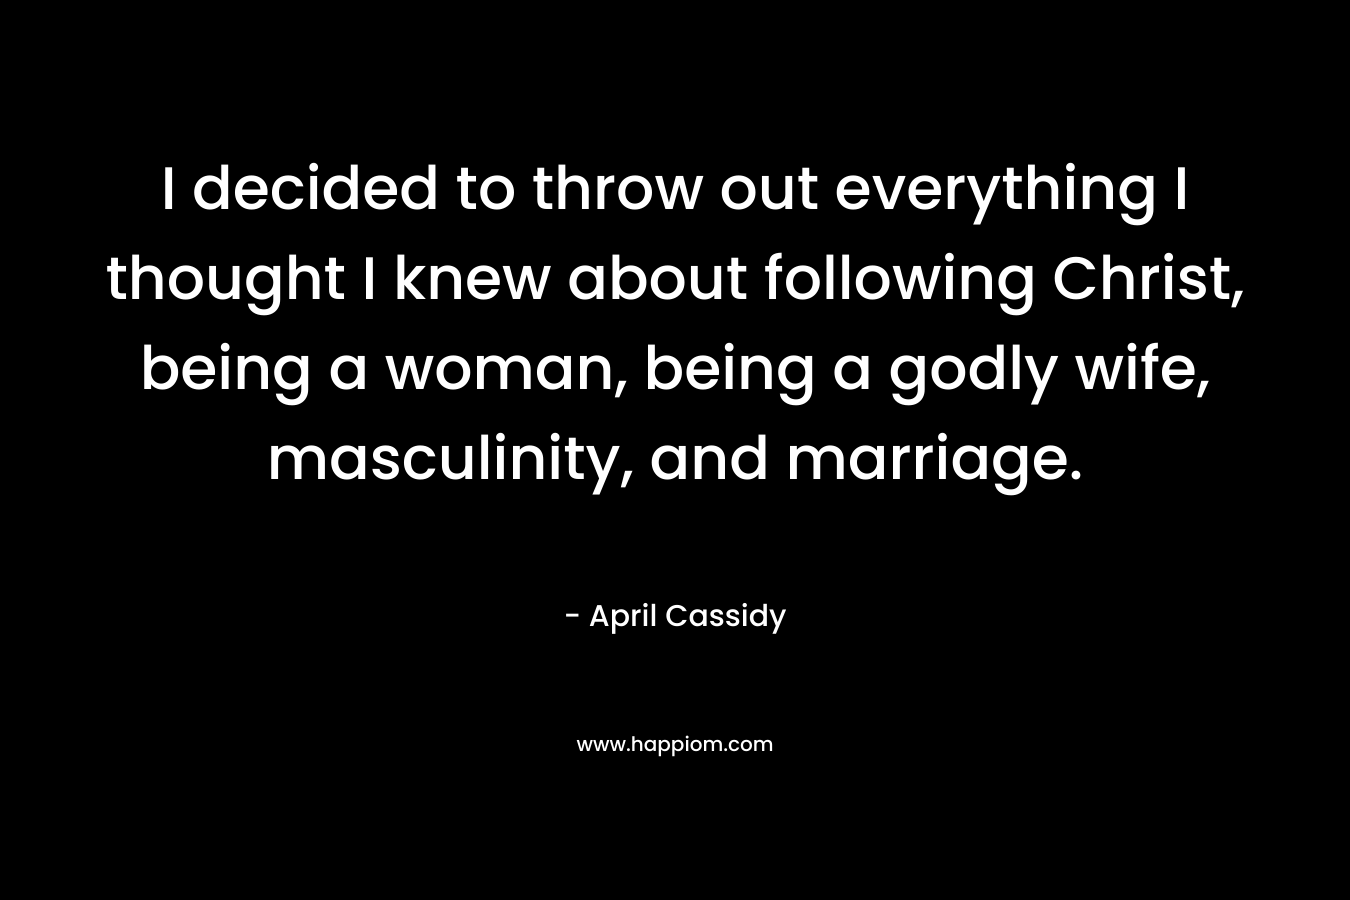 I decided to throw out everything I thought I knew about following Christ, being a woman, being a godly wife, masculinity, and marriage.